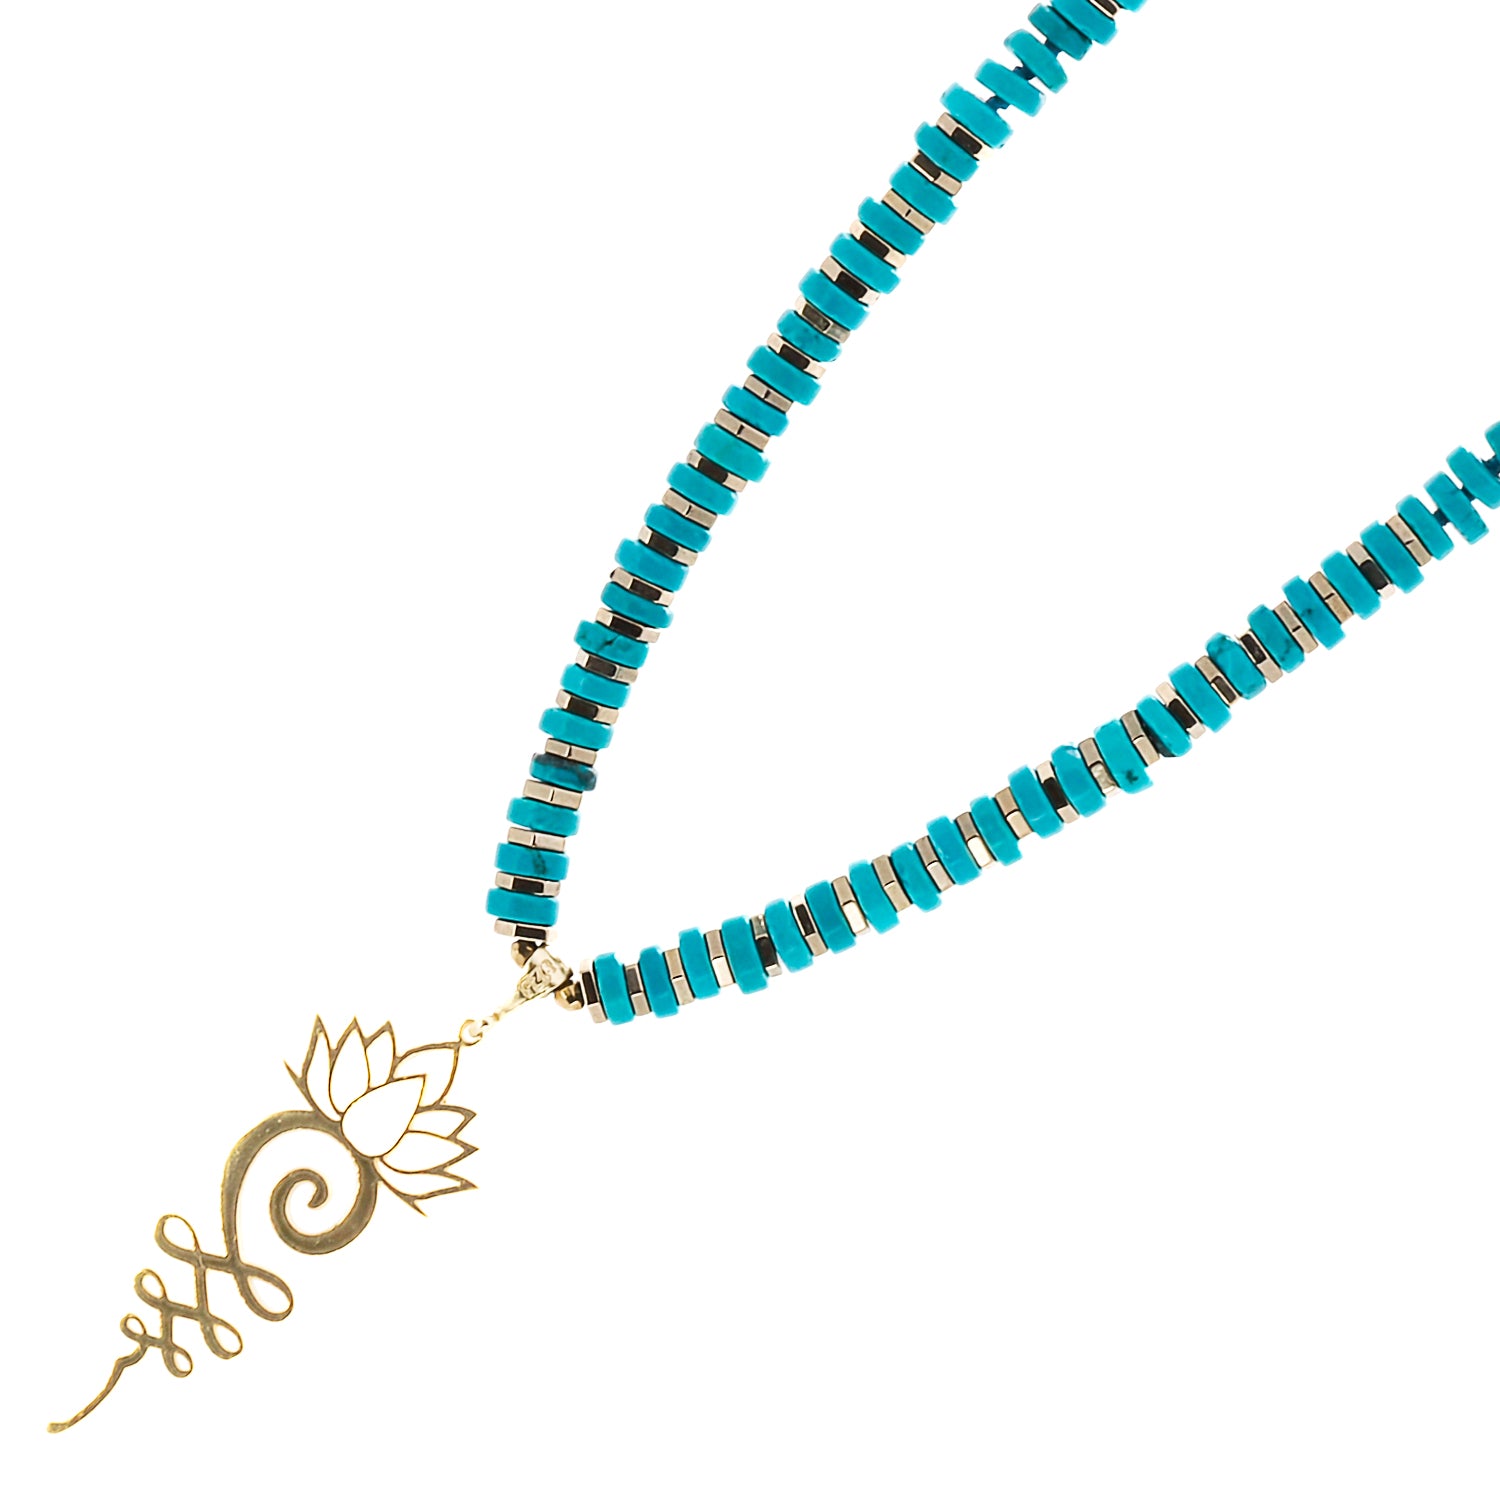 The Turquoise Unalome Serenity Necklace, radiating a sense of serenity